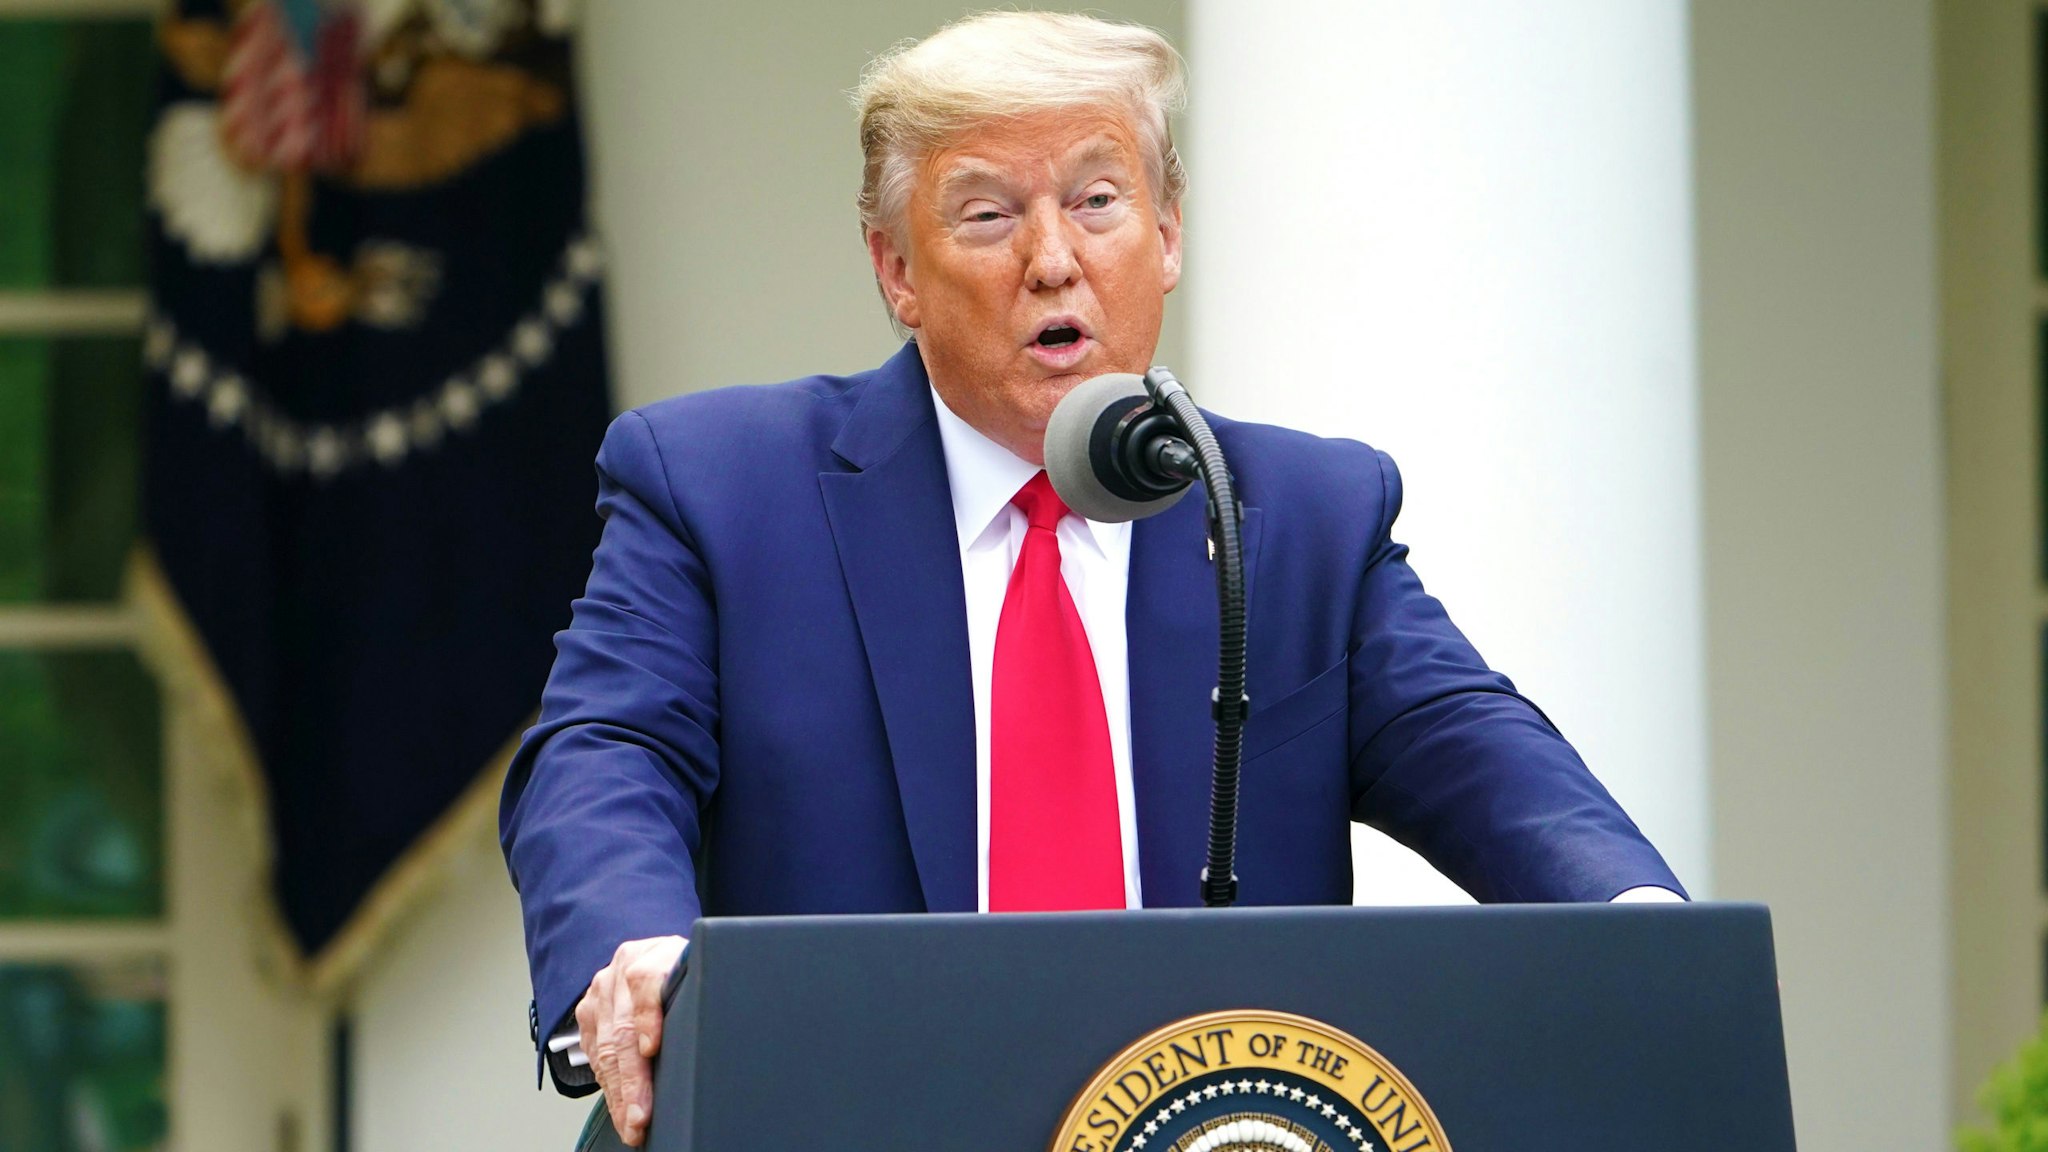 US President Donald Trump speaks during the daily briefing on the novel coronavirus, which causes COVID-19, in the Rose Garden of the White House on April 14, 2020, in Washington, DC.